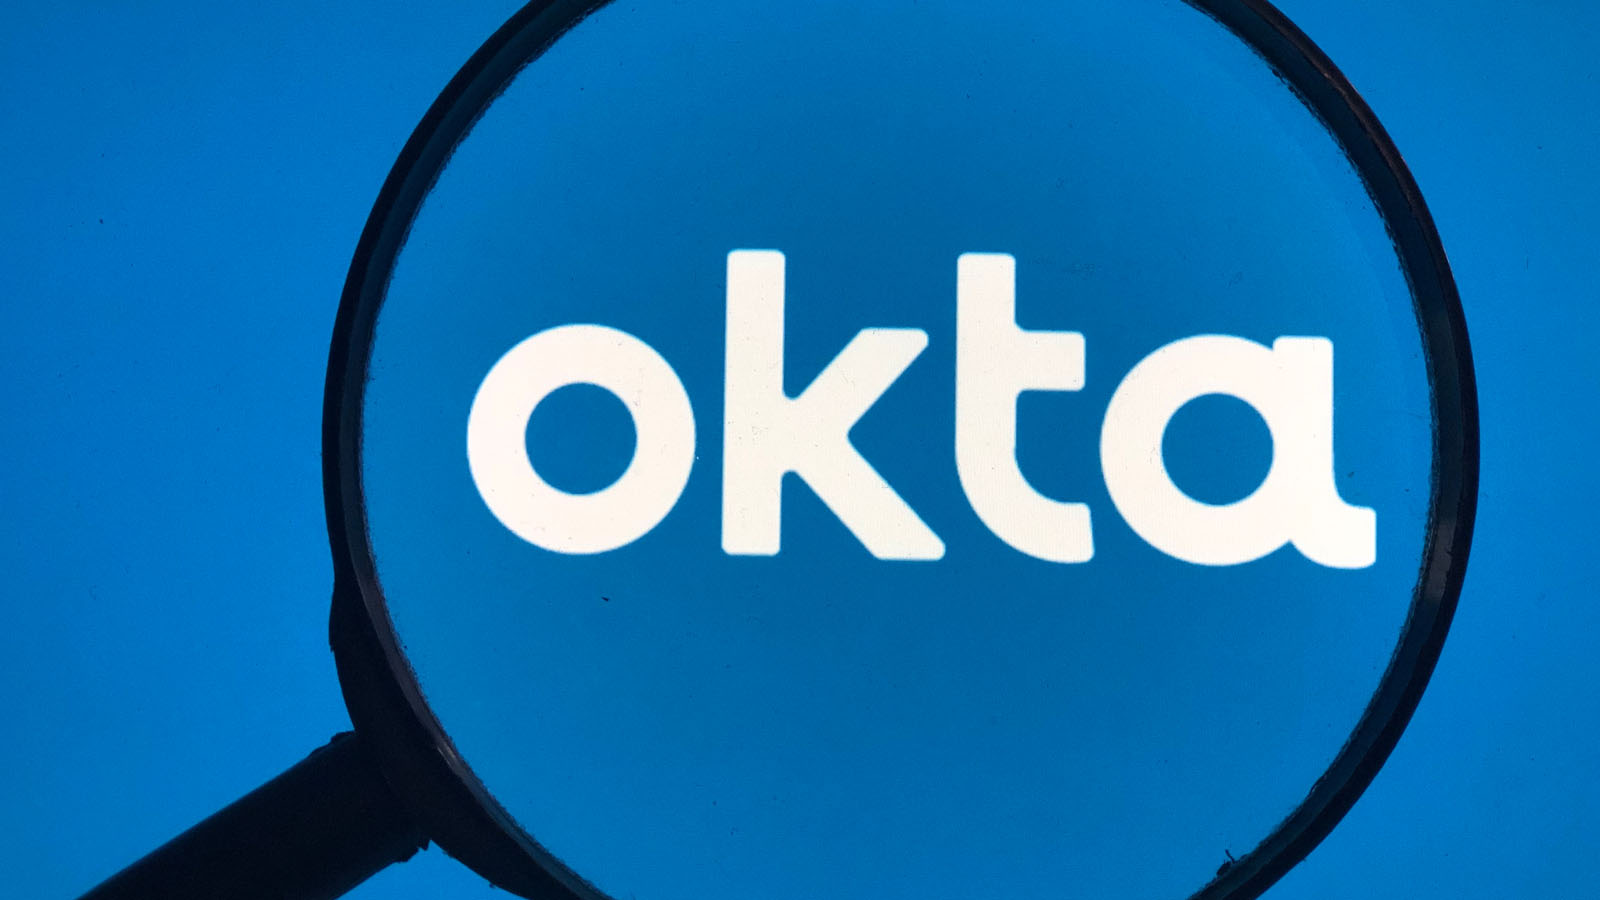 Okta Announces Layoffs Of 400 Employees, Citing Long-Term Growth Strategy